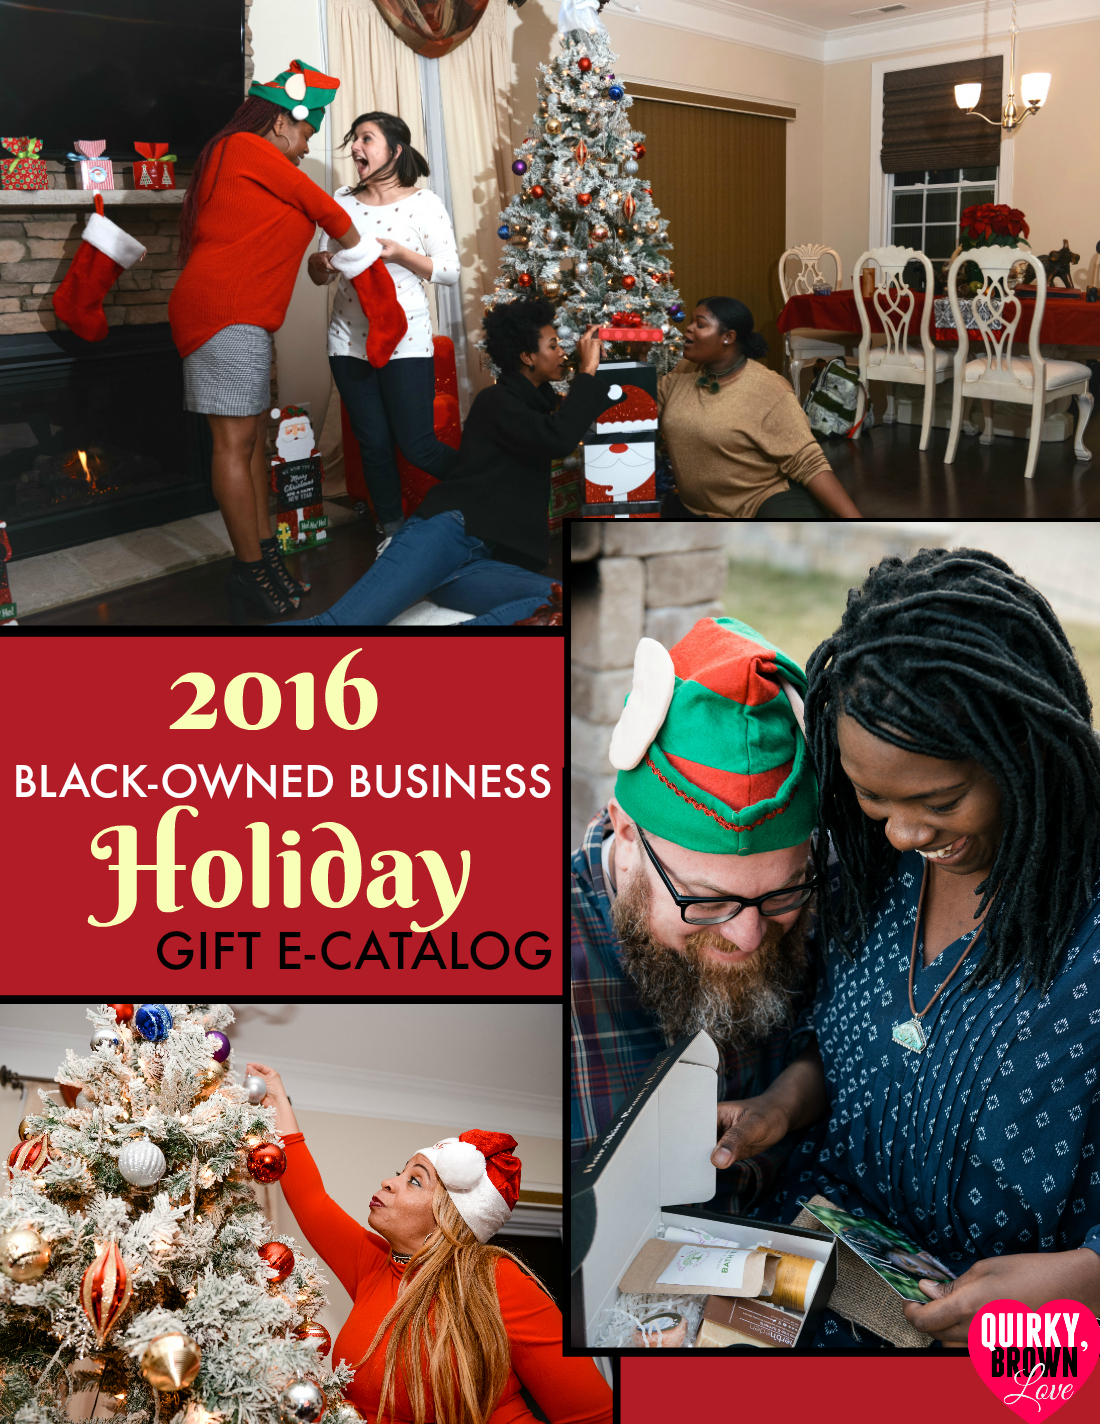 2016 Black Business Holiday Catalog from QuirkyBrownLove